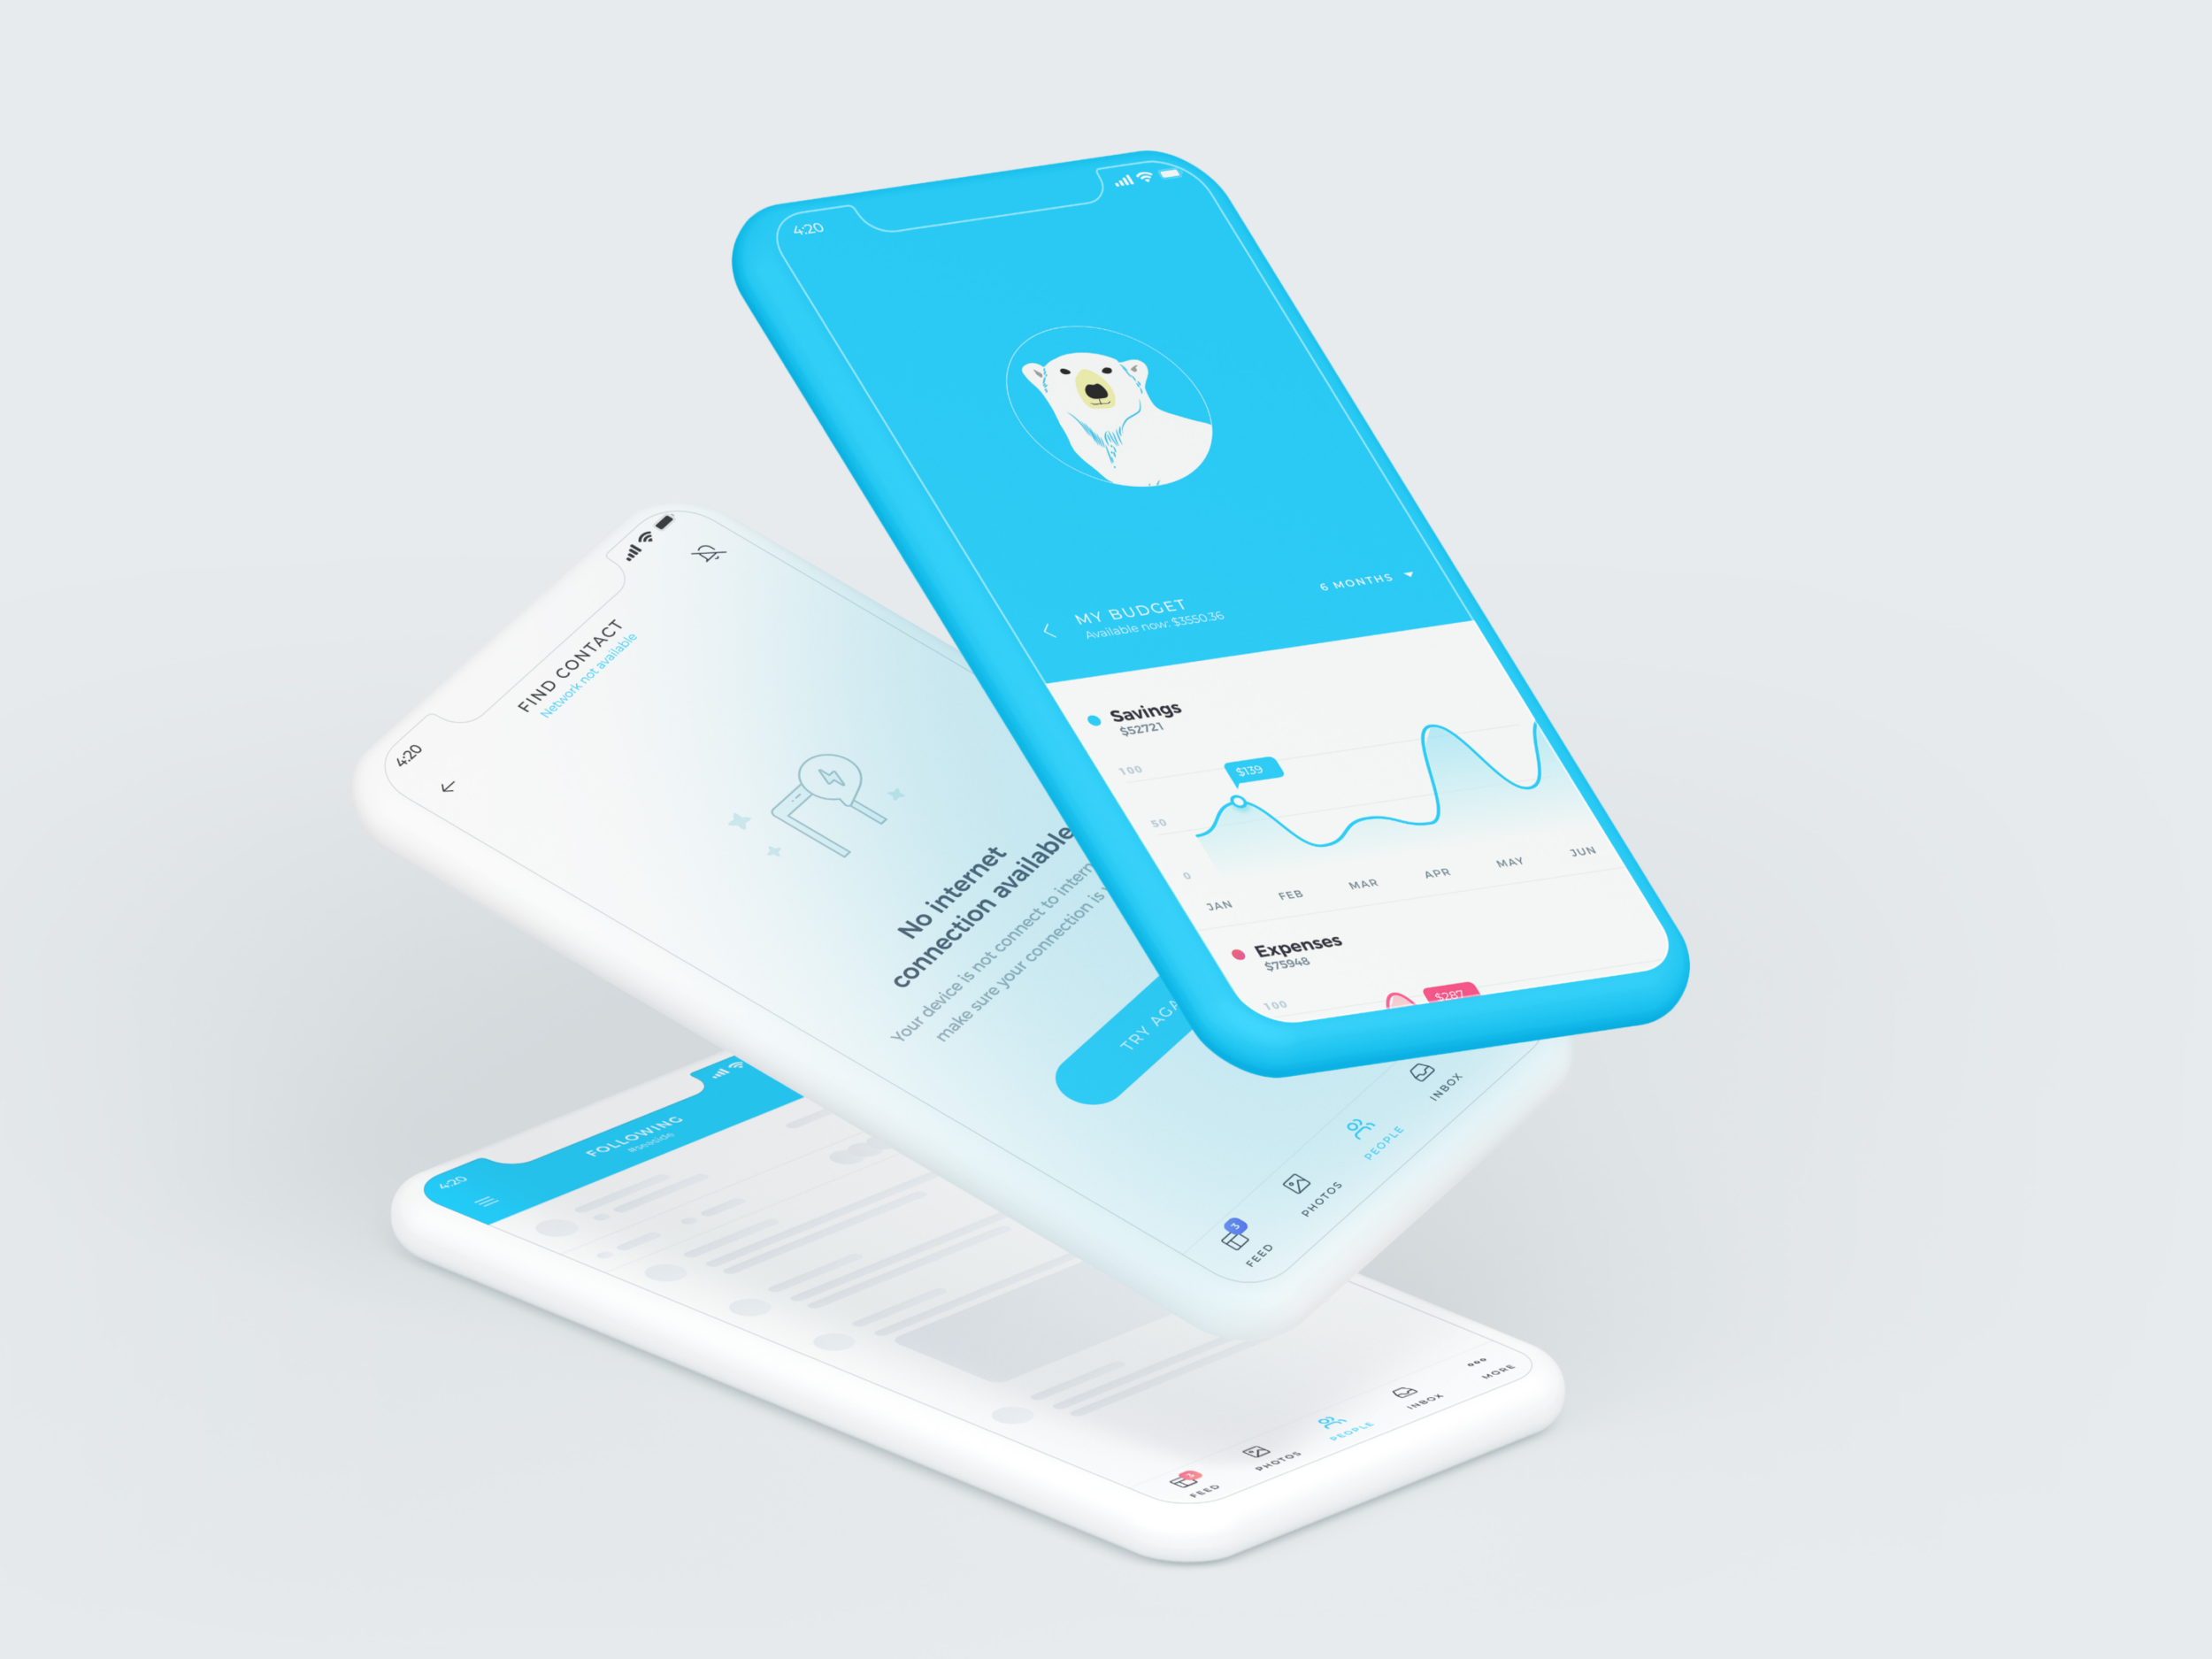 Flying phone mockups (so you don’t focus too much on the actual design): one of the hottest portfolio trends in 2019.